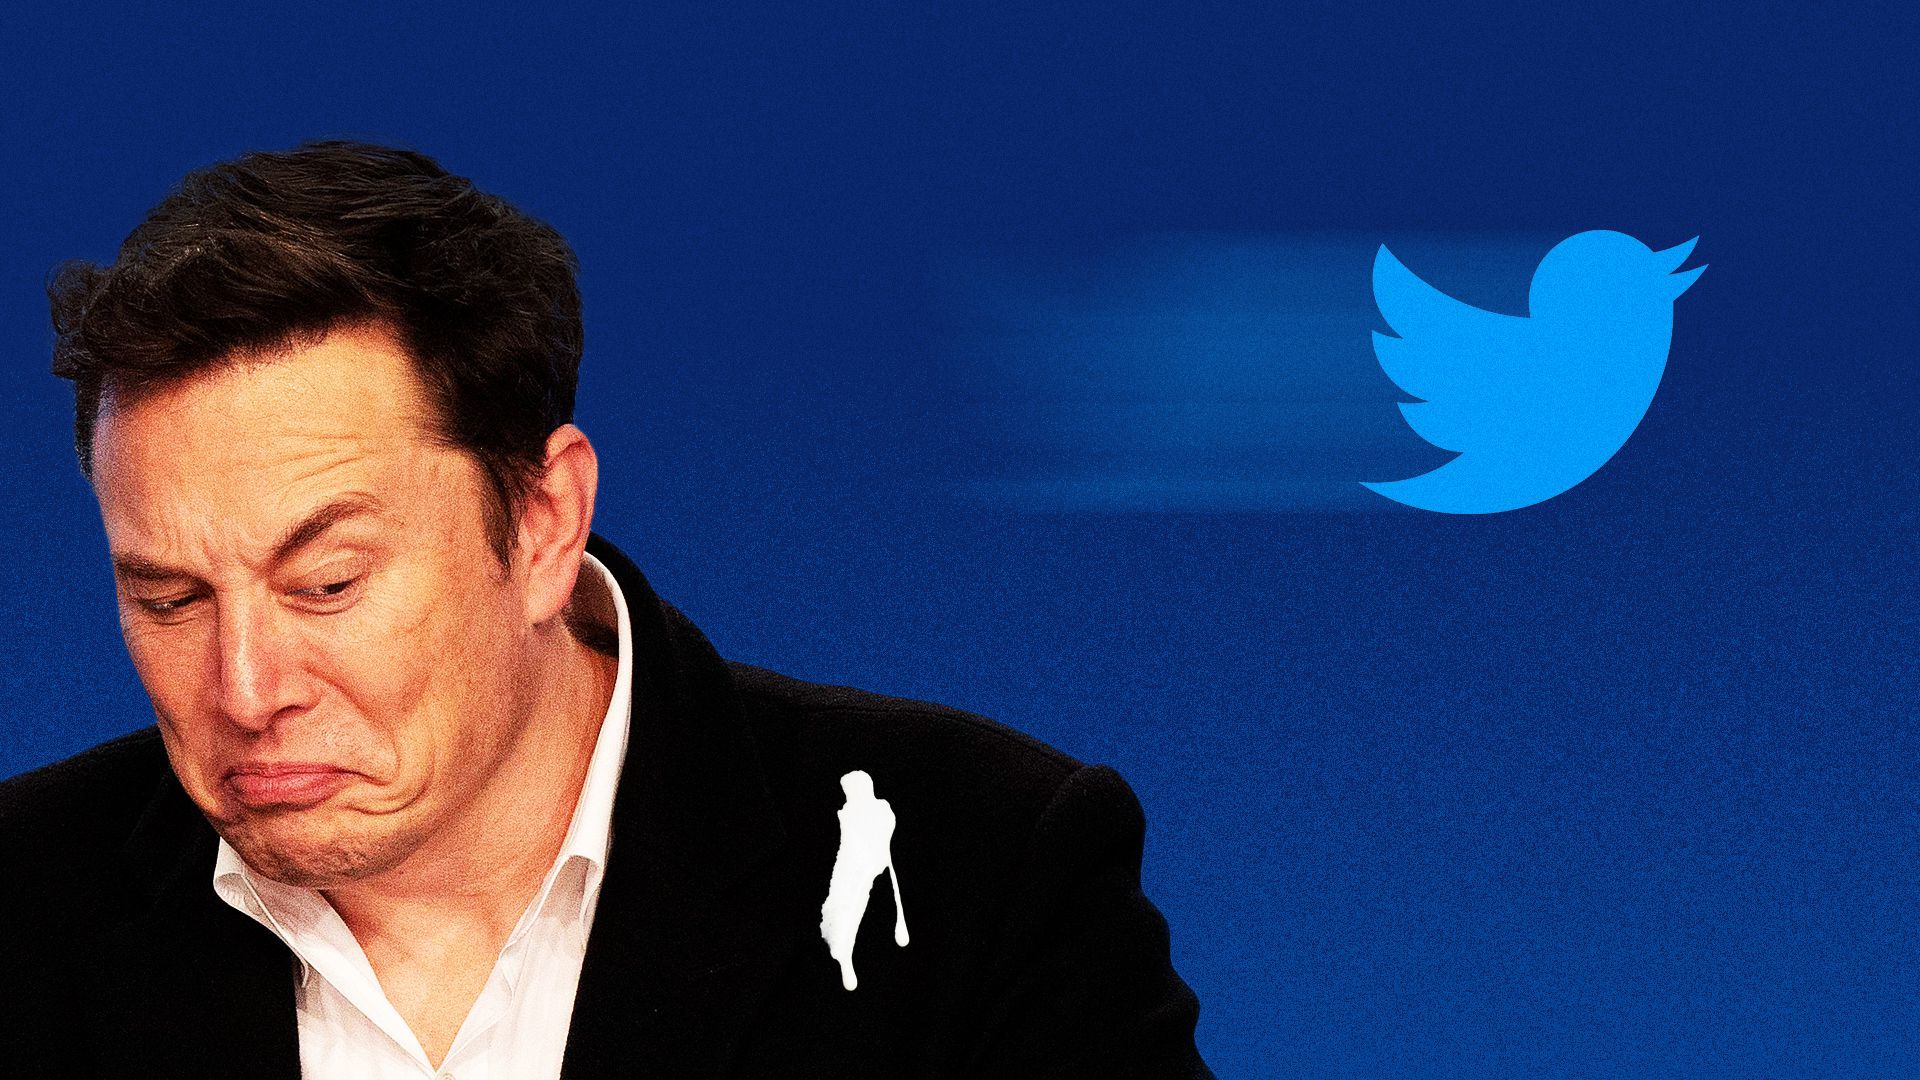 Illustration of the Twitter bird flying past Elon Musk, leaving droppings on his shoulder. 